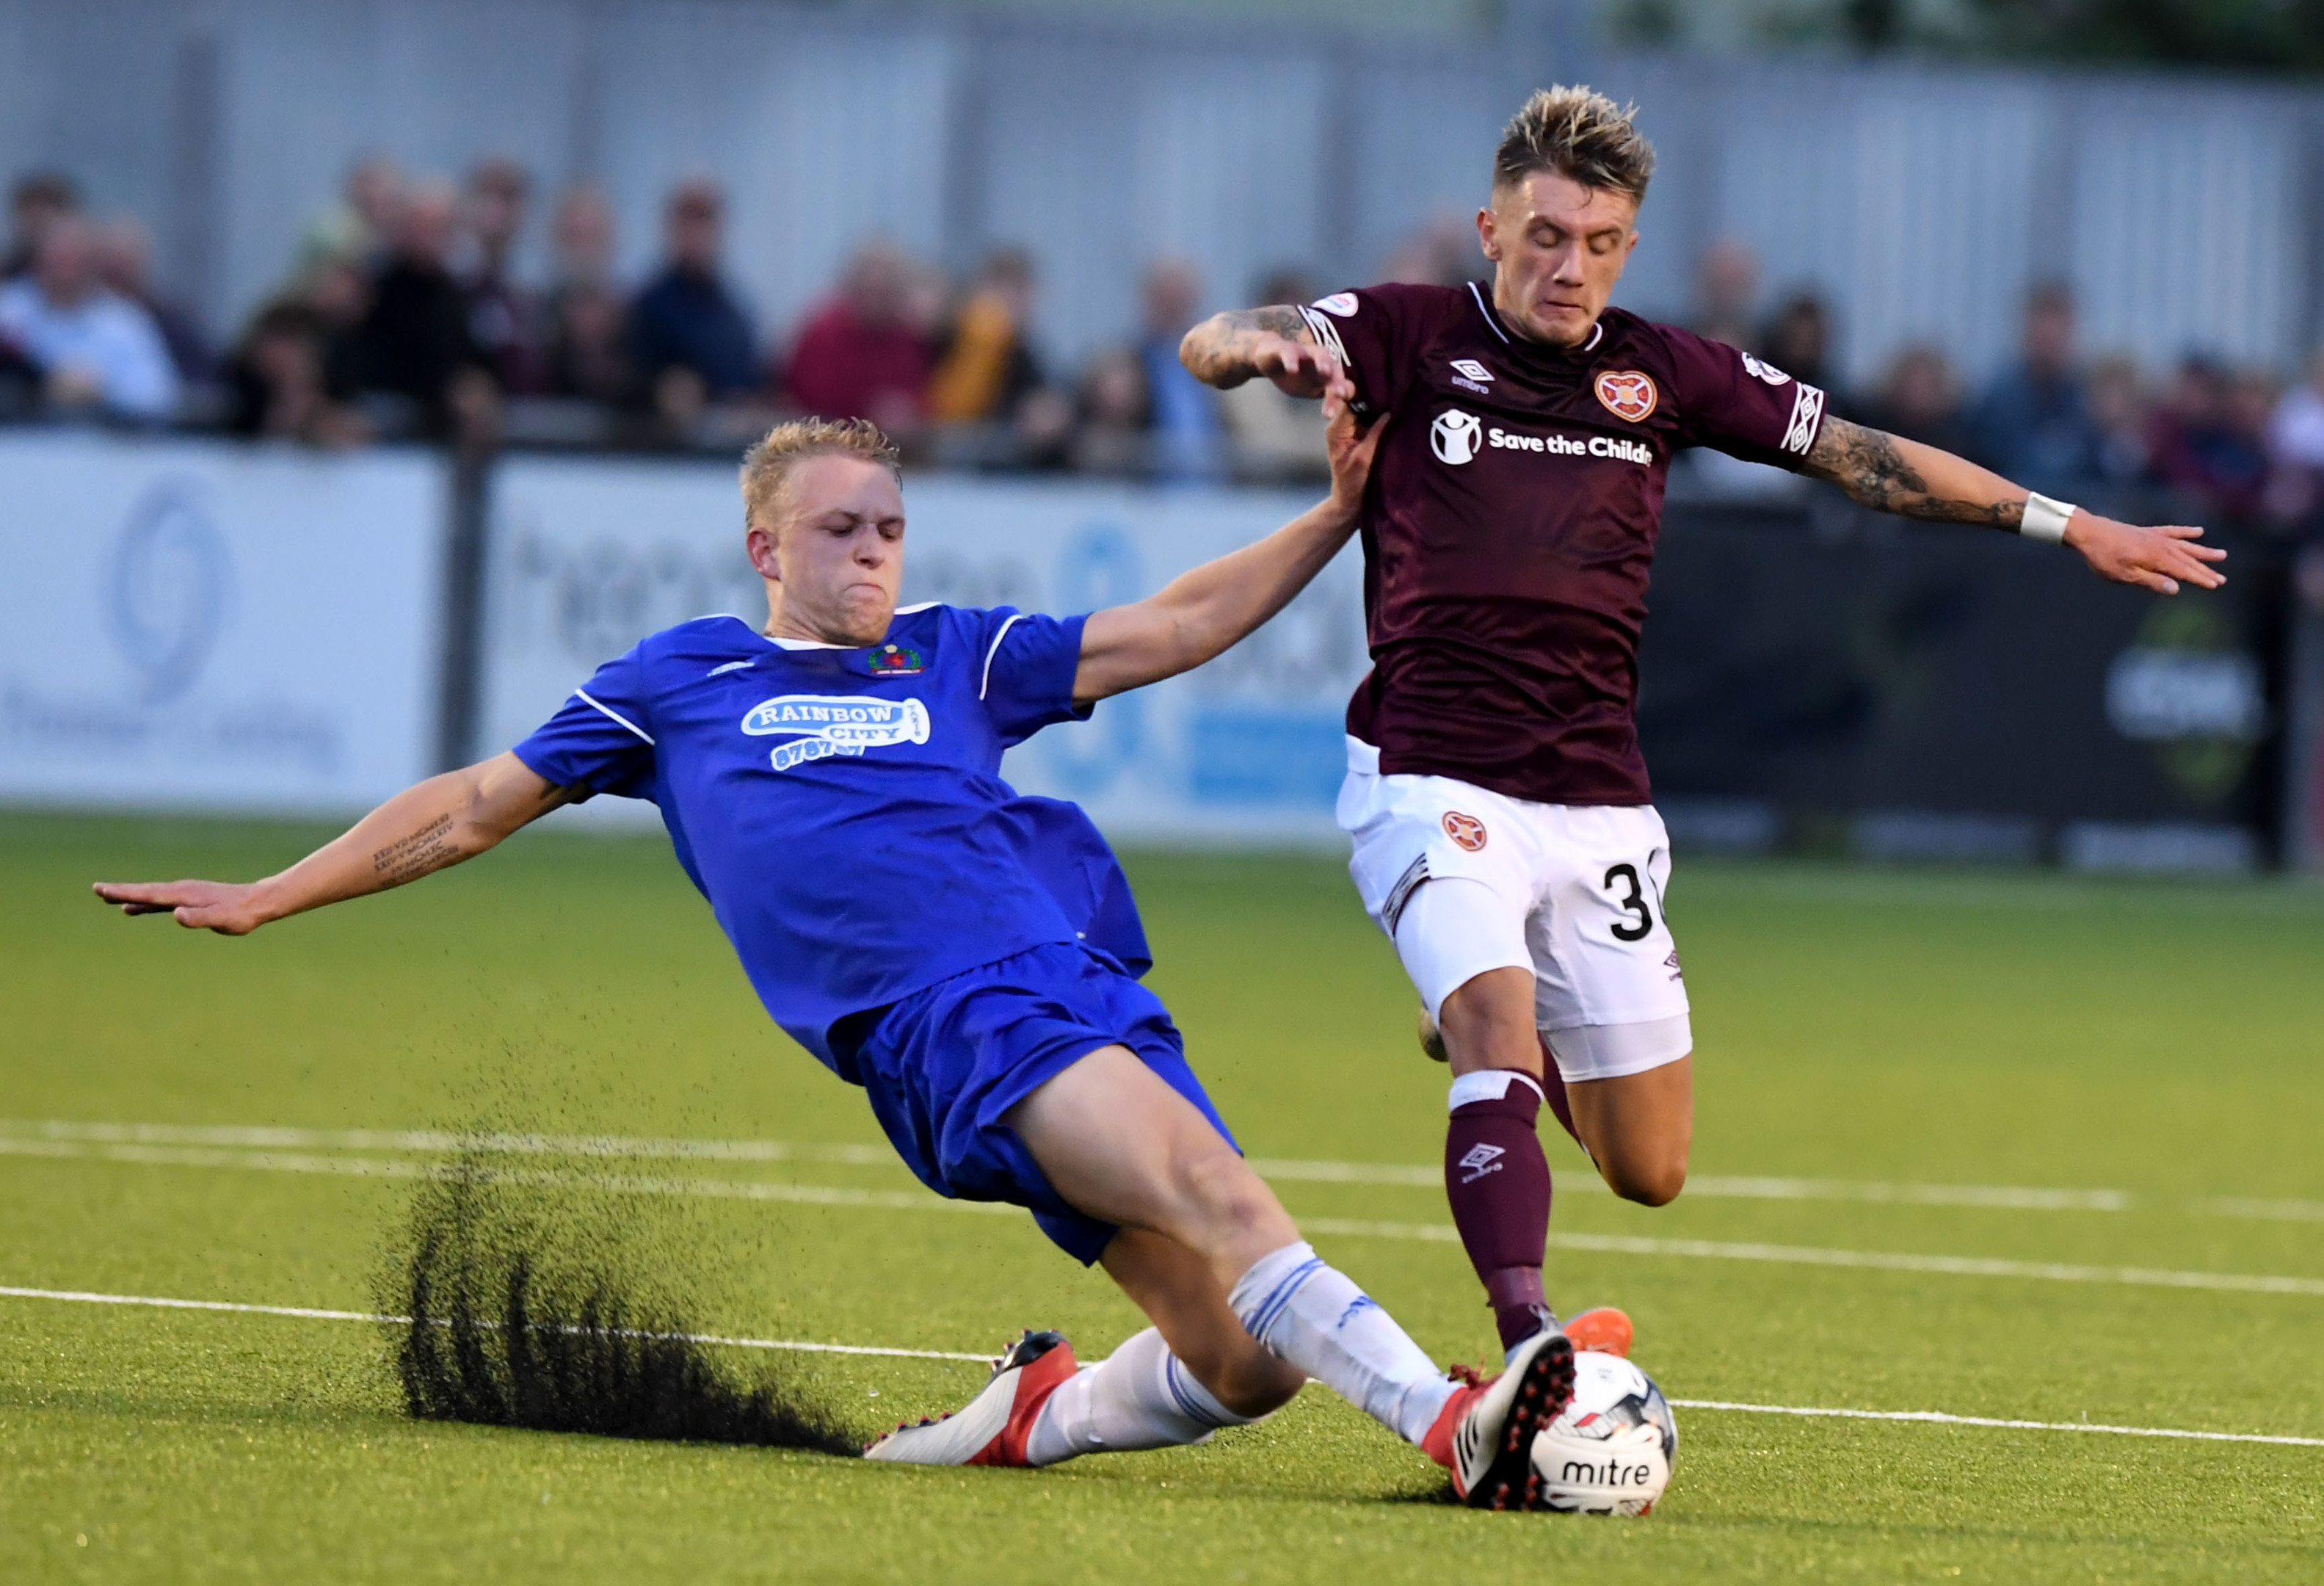 Hearts fielded an ineligible player in their win at Cove Rangers